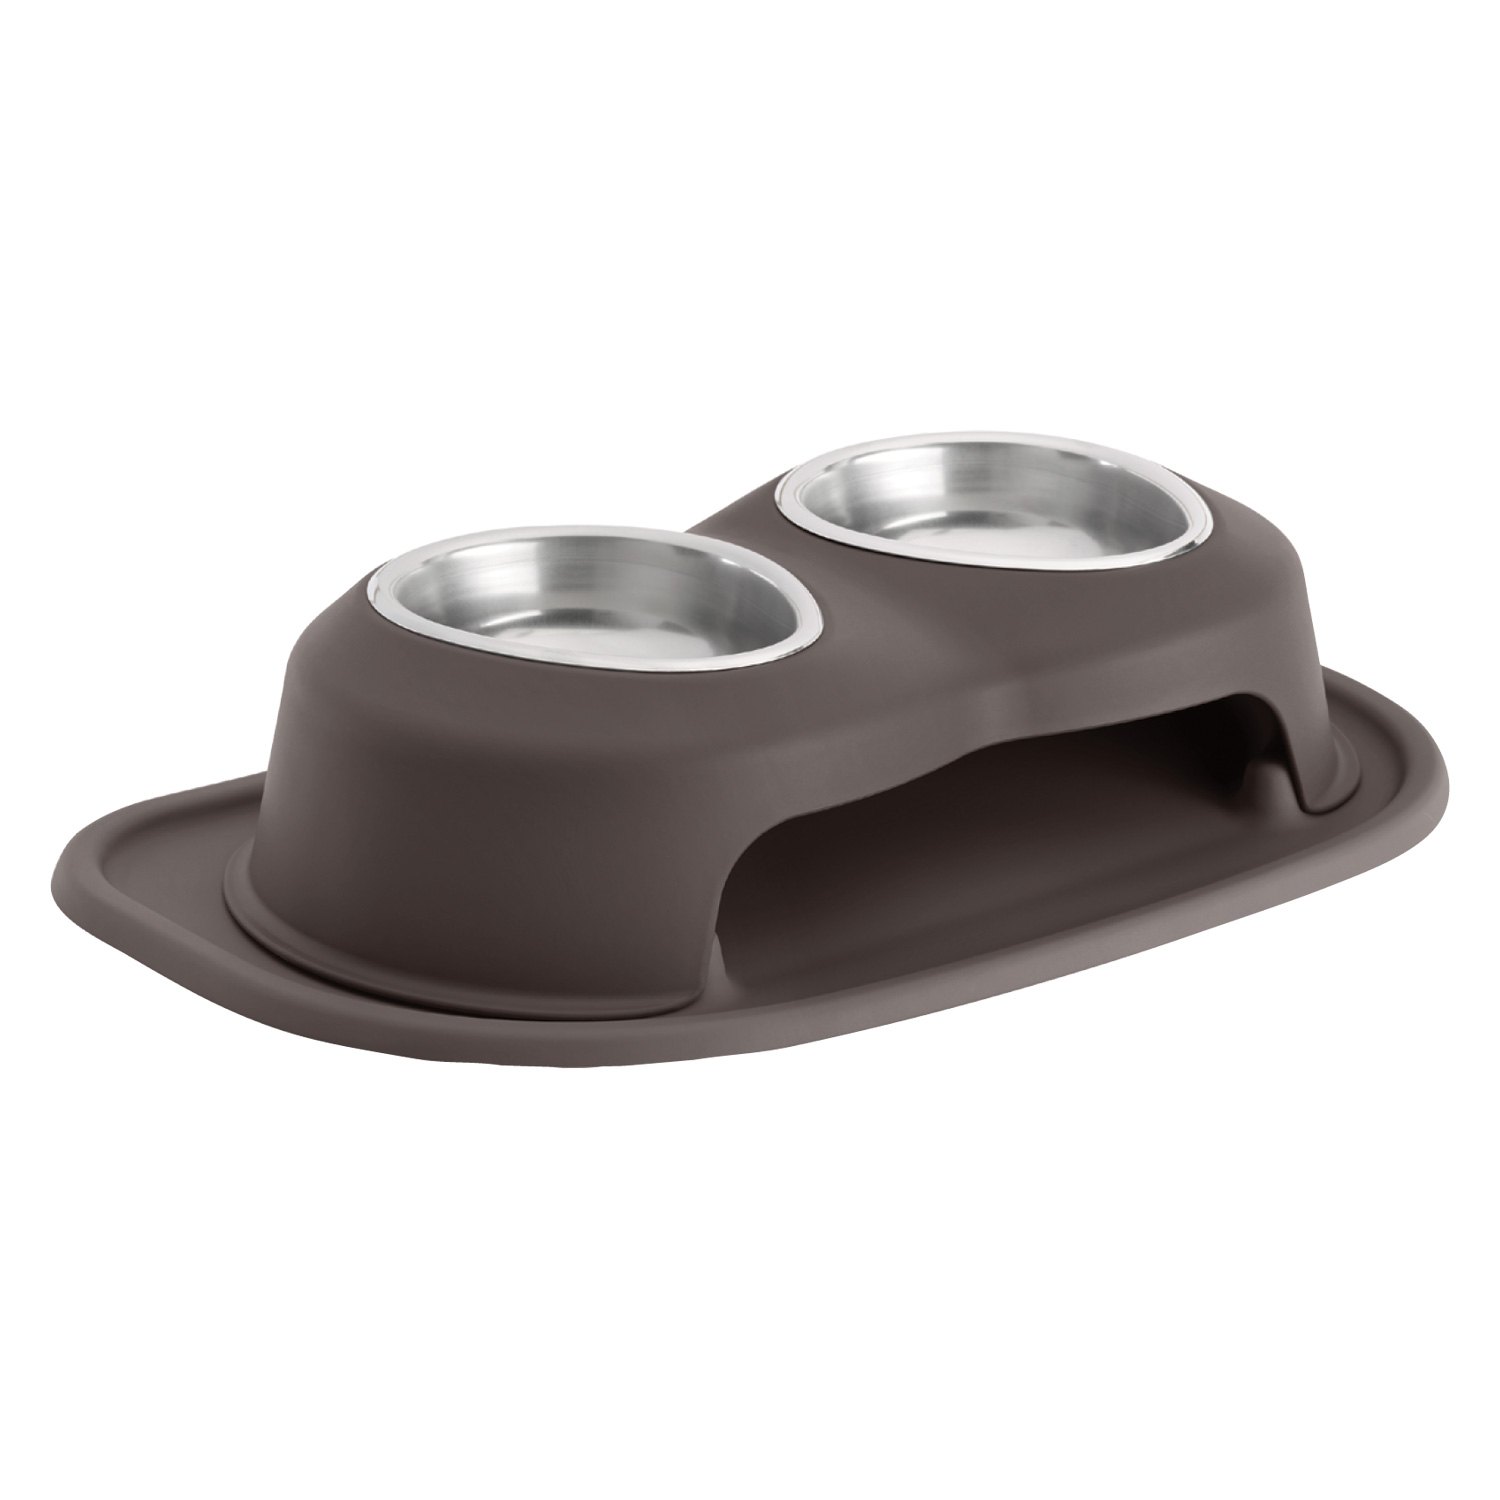 WeatherTech Pet Feeding System 10 Double Height Dog Bowls